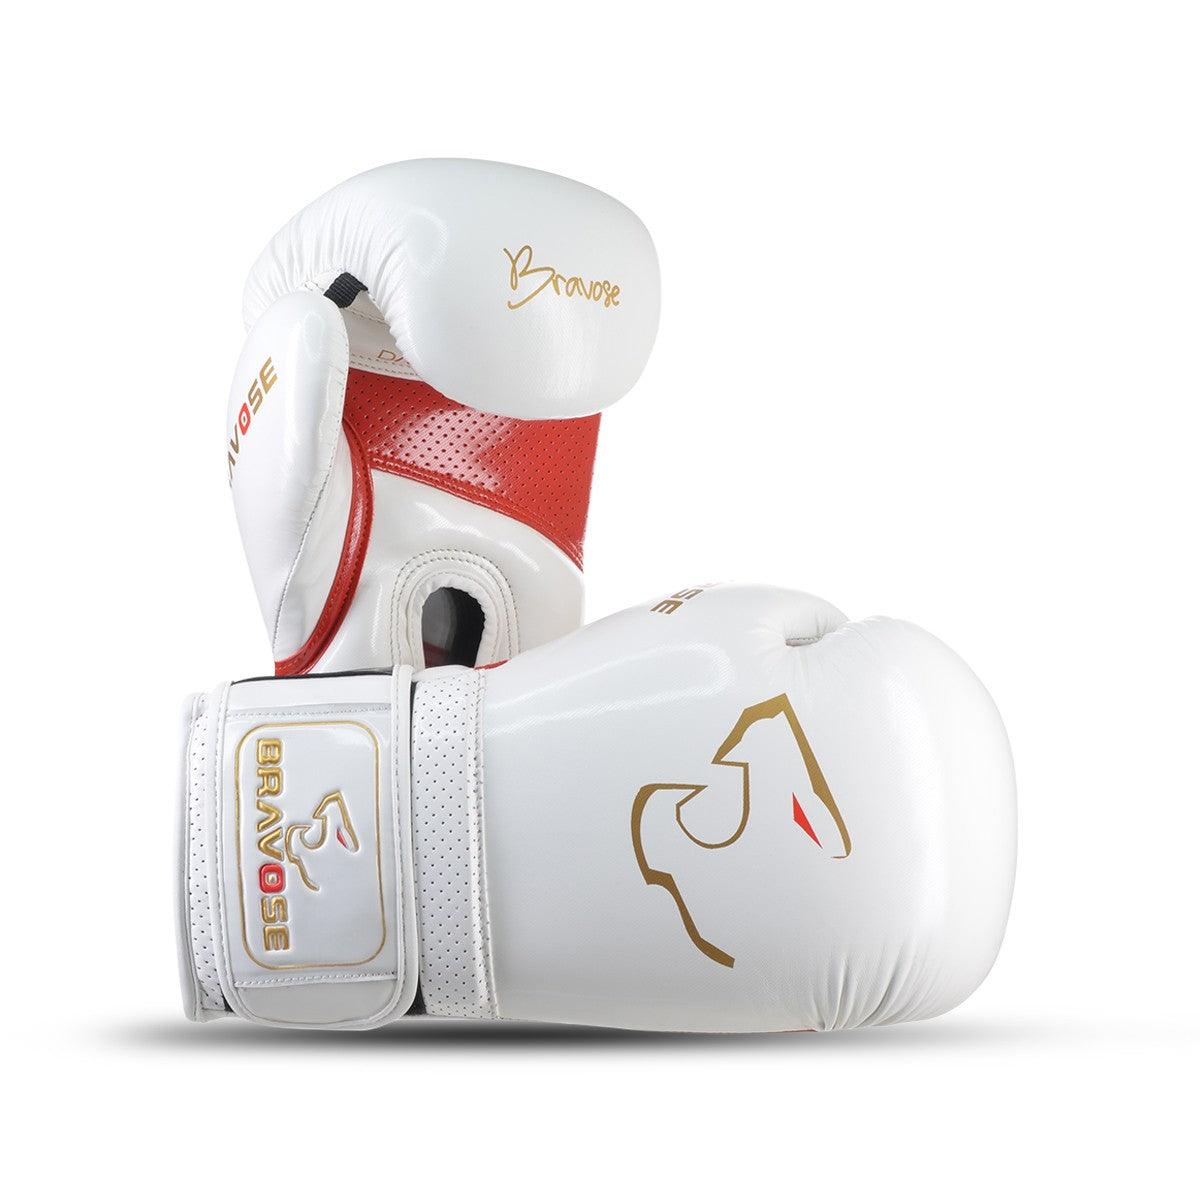 Premium Boxing Glove Review Valour Strike Golden Eagle by Fit2Box Boxing  Expert Analysis  🔥 We're over the moon and extremely proud to see this  video published on the Fit2Box  channel